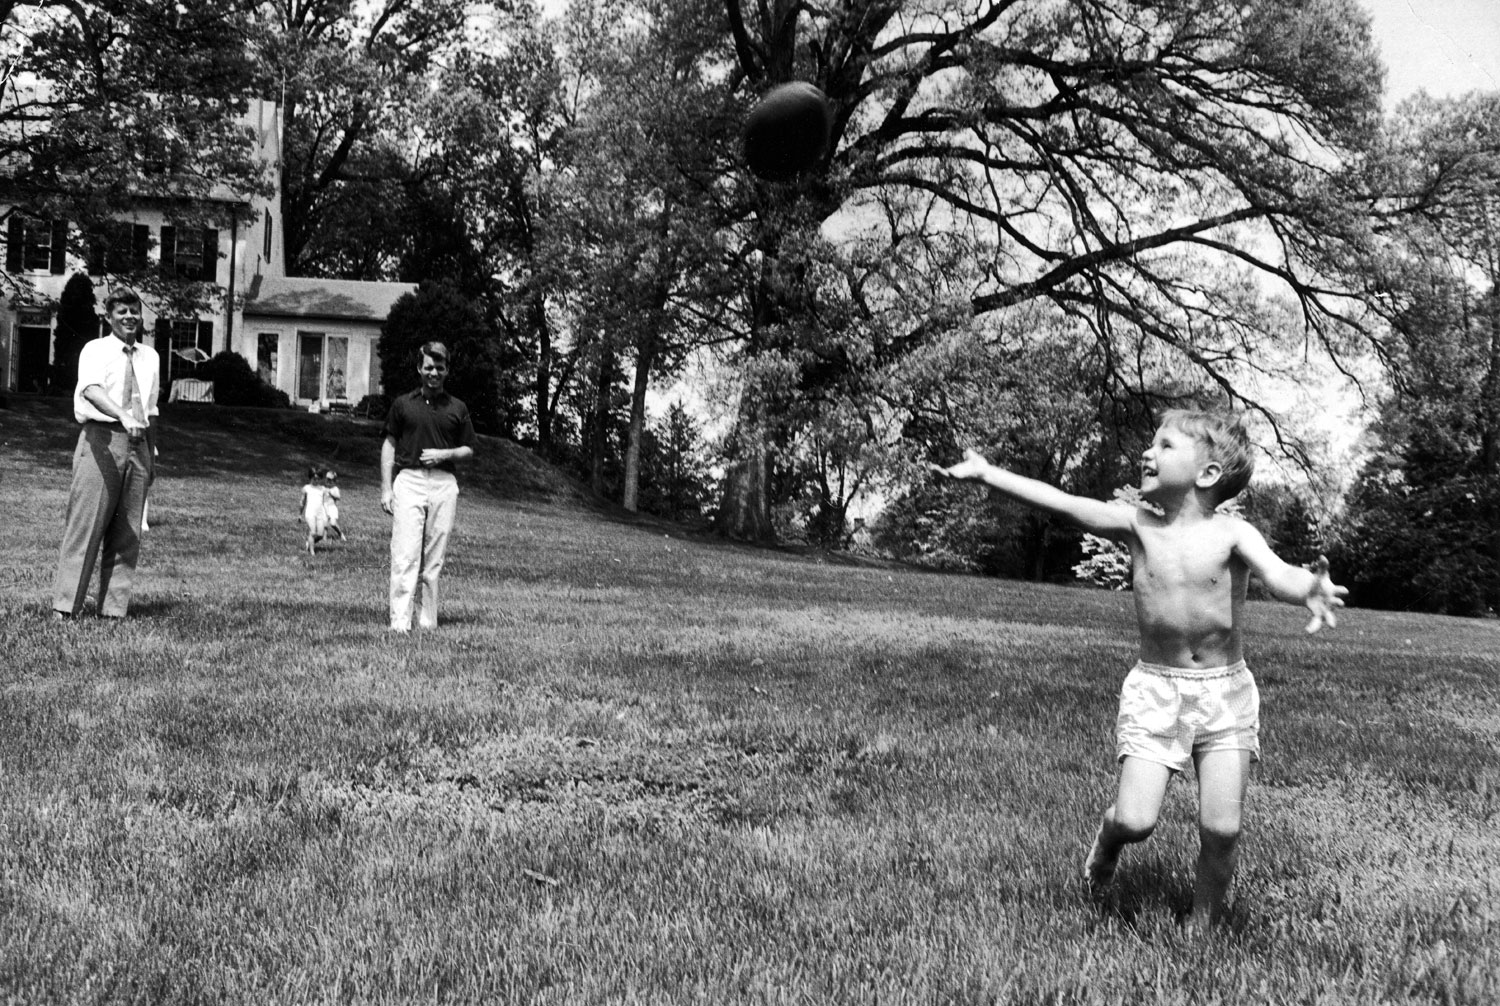 Sen. John Kennedy plays football with his nephew, Bobby Jr., at his brother Robert's Hickory Hill, Va., home, 1957.